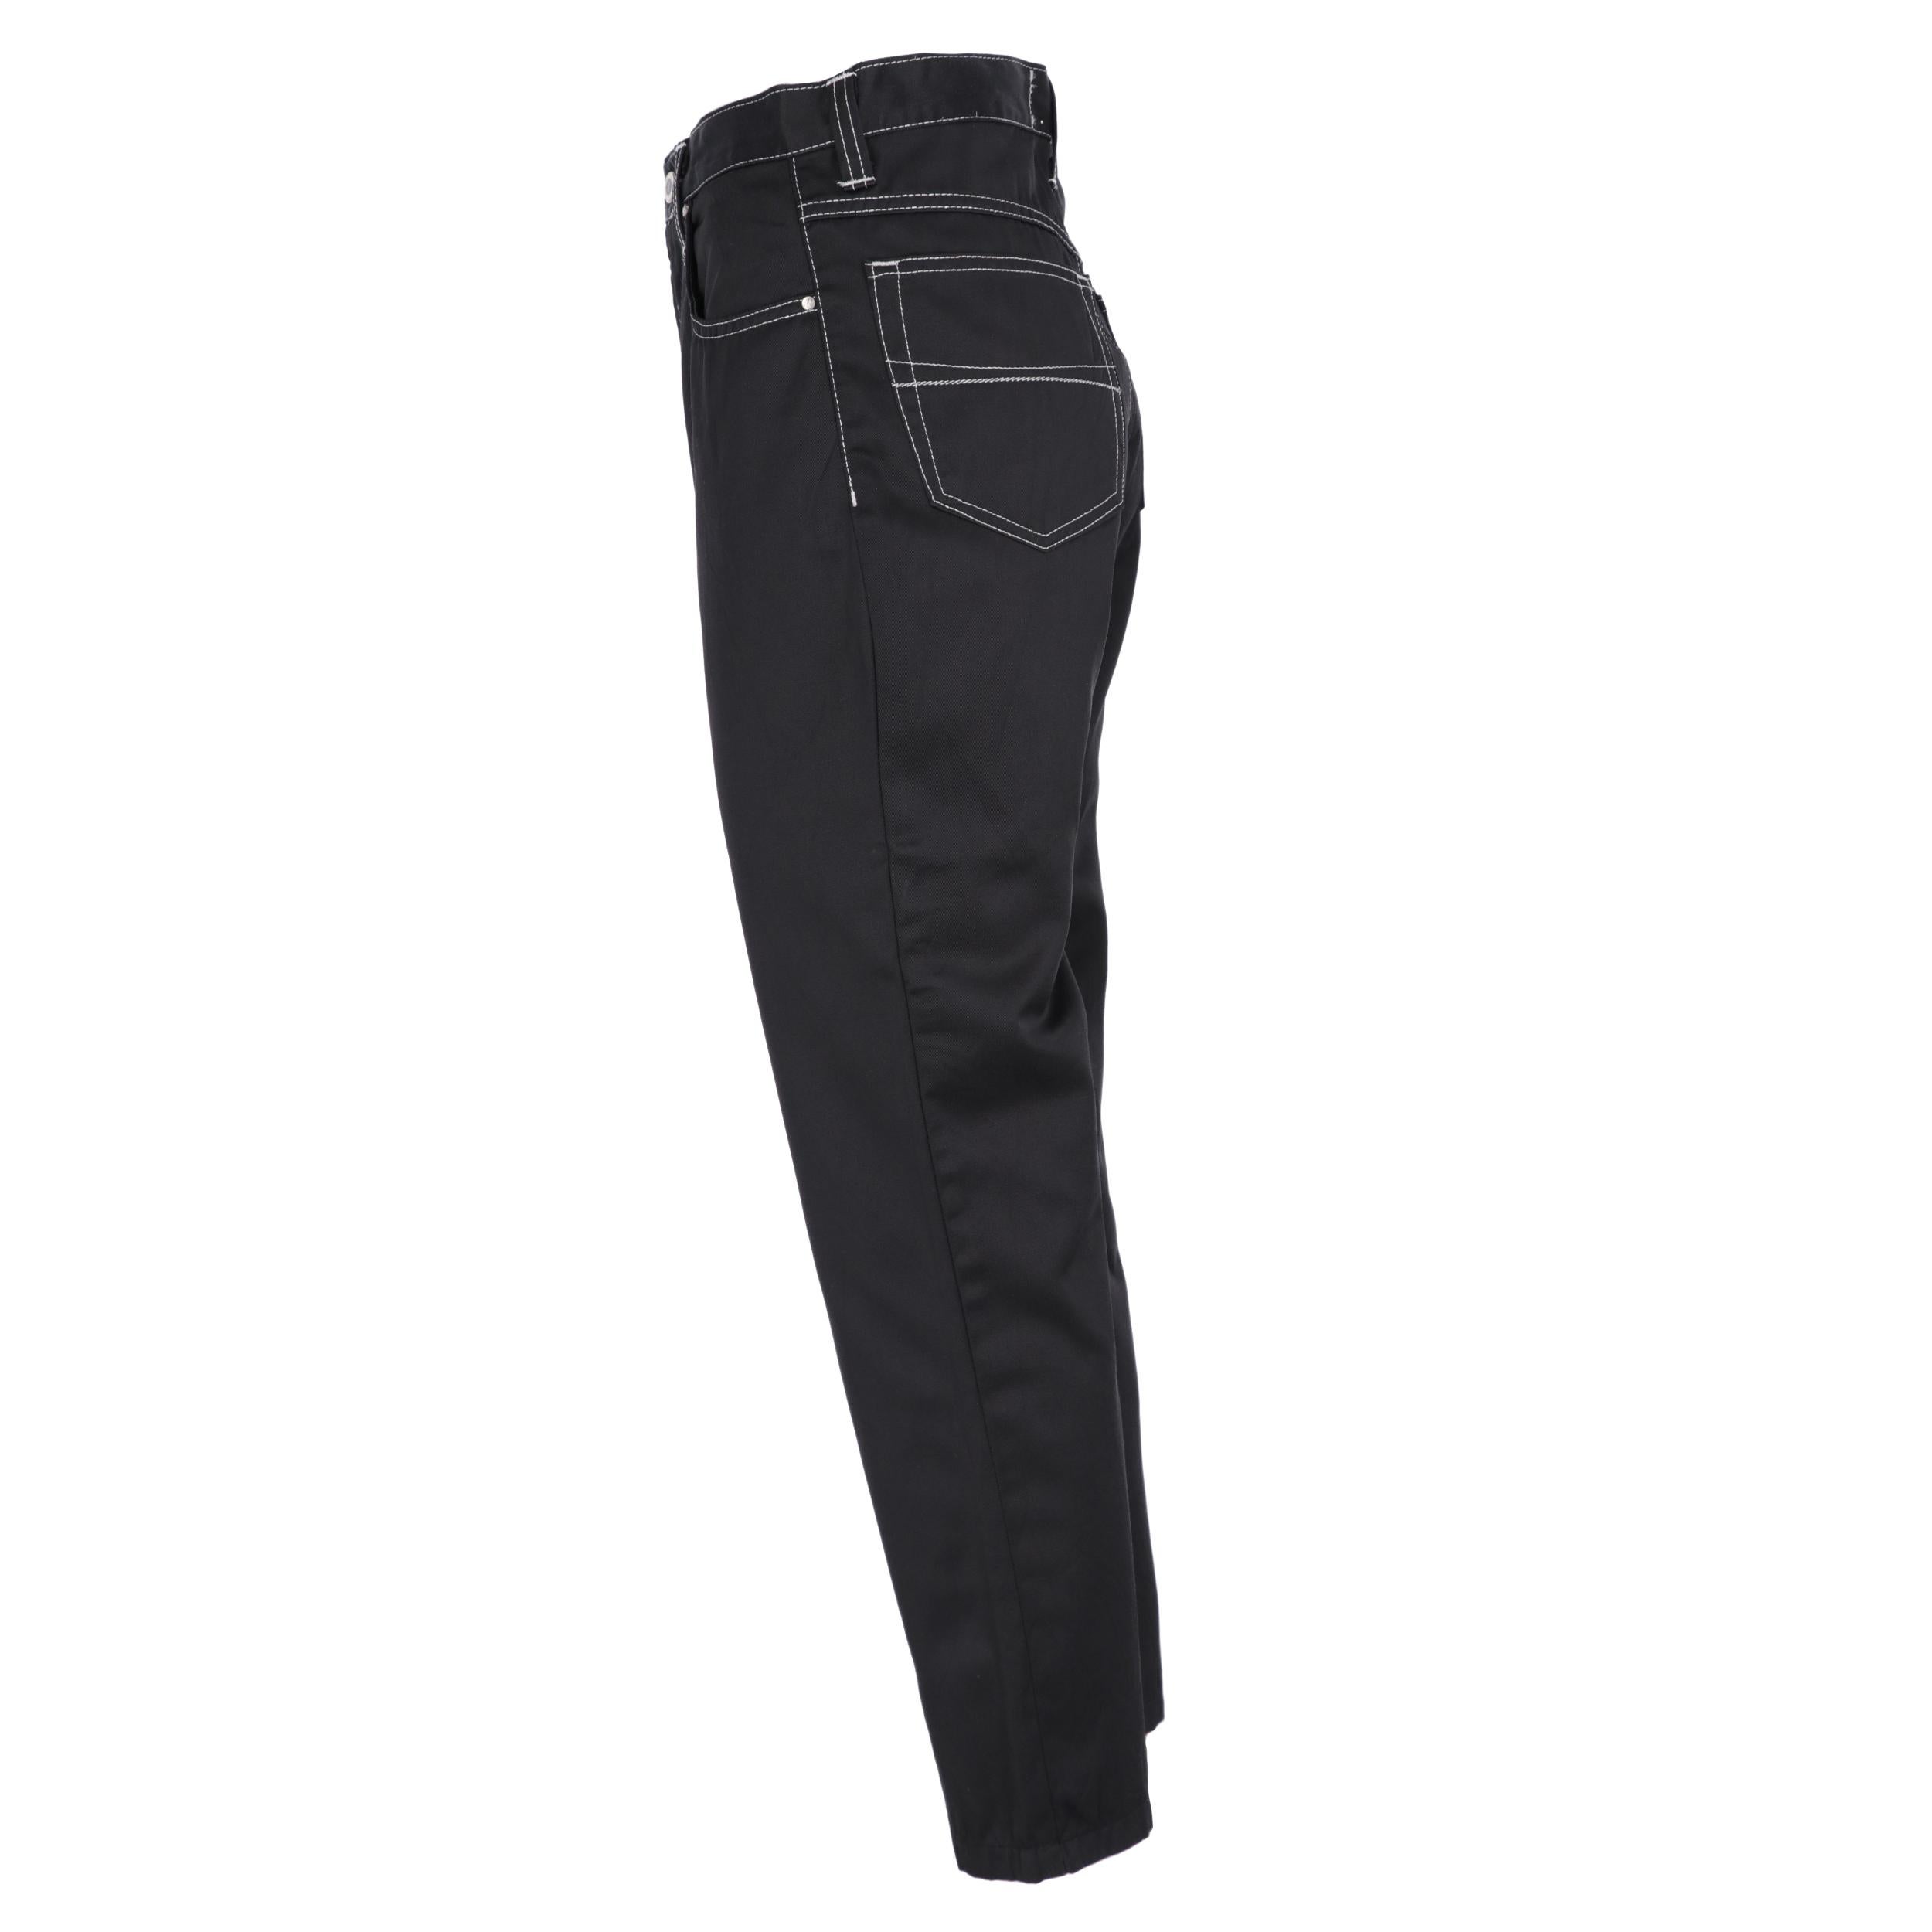 Gianfranco Ferré black cotton blend denim trousers. High-waisted model and carrot cut. Front closure with button and zip and white decorative stitching. Tight fit.

The product shows the back label slightly used as shown in the pictures.

Years: